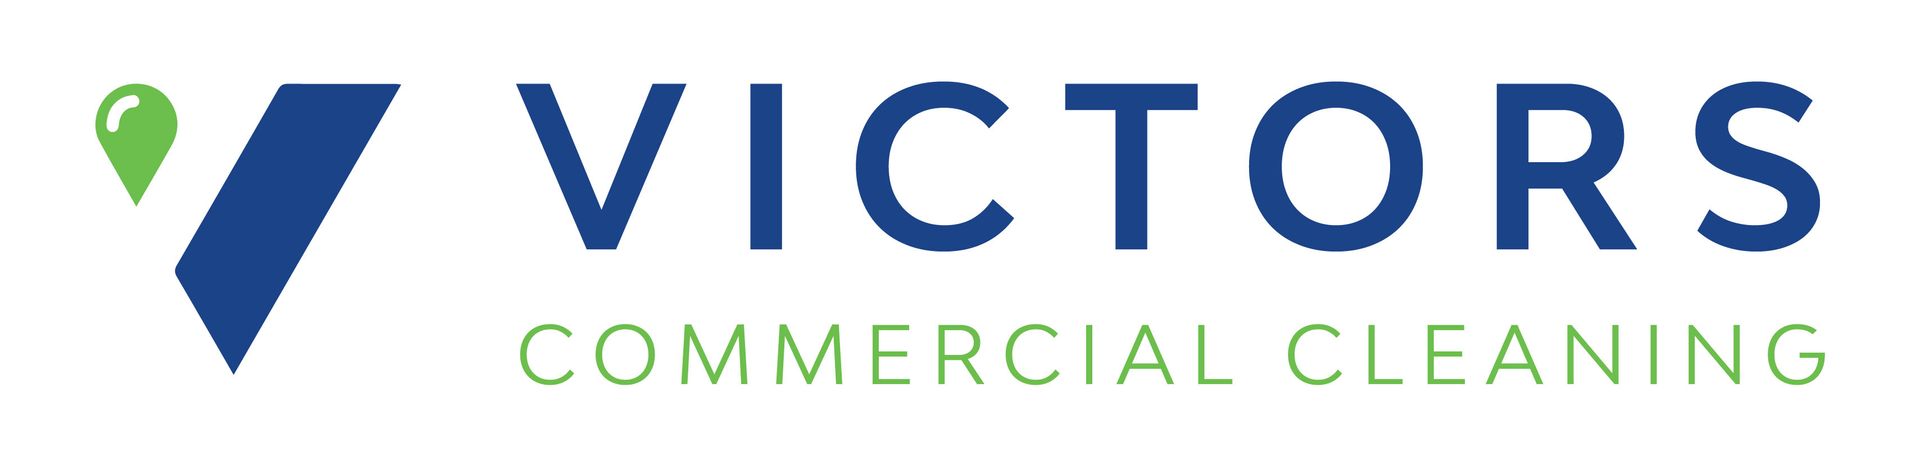 Victors Commercial Cleaning